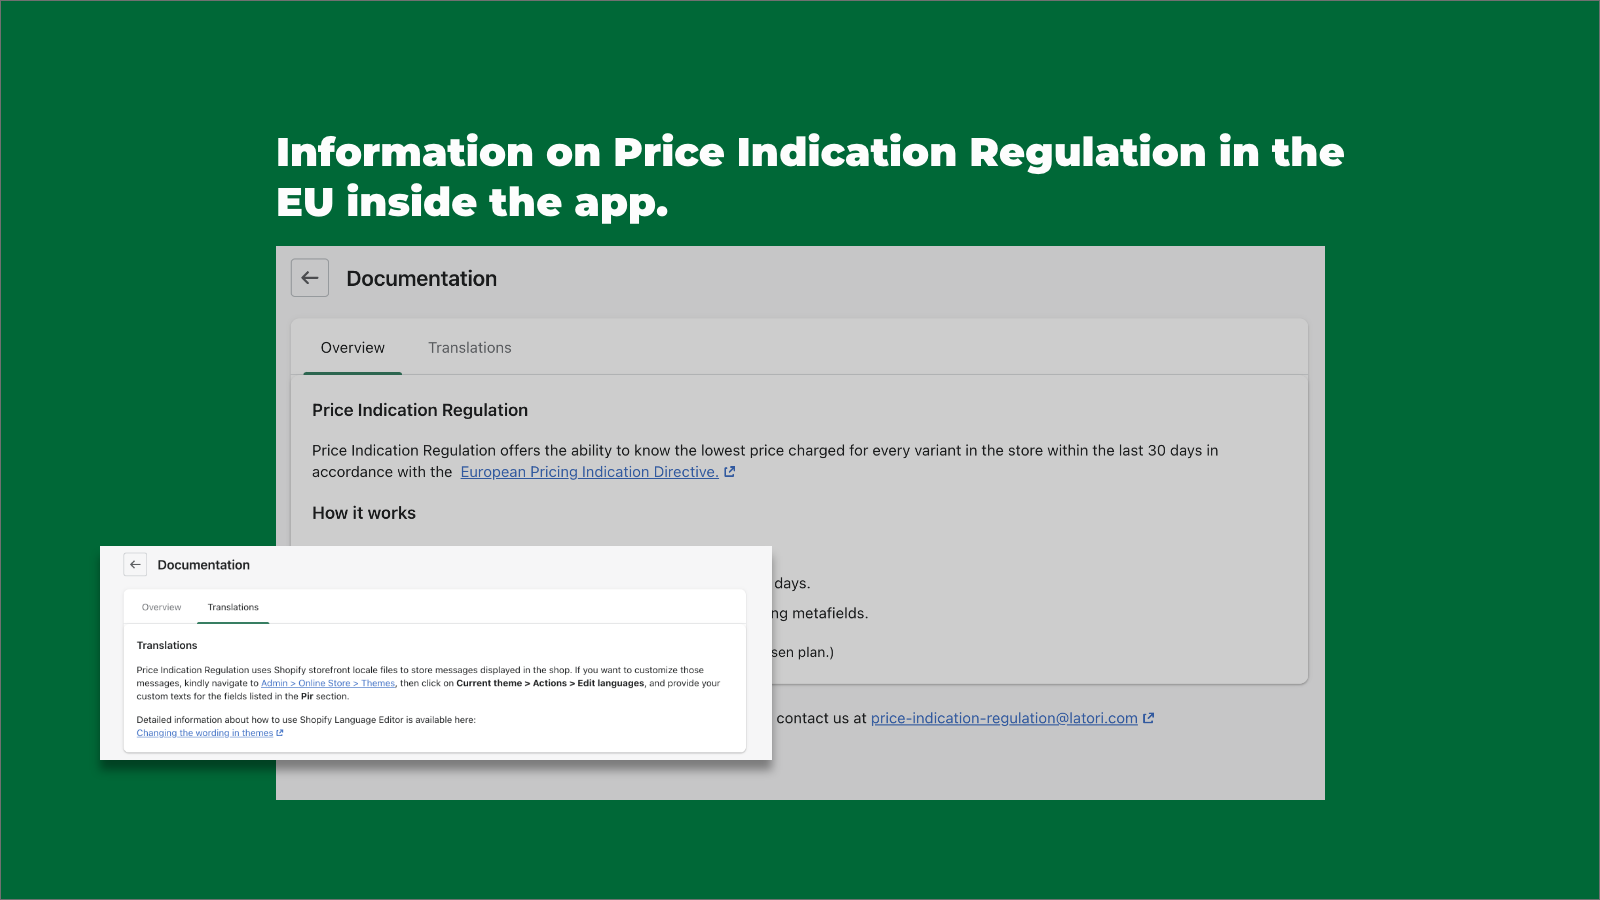 Information about Price Indication Regulation law